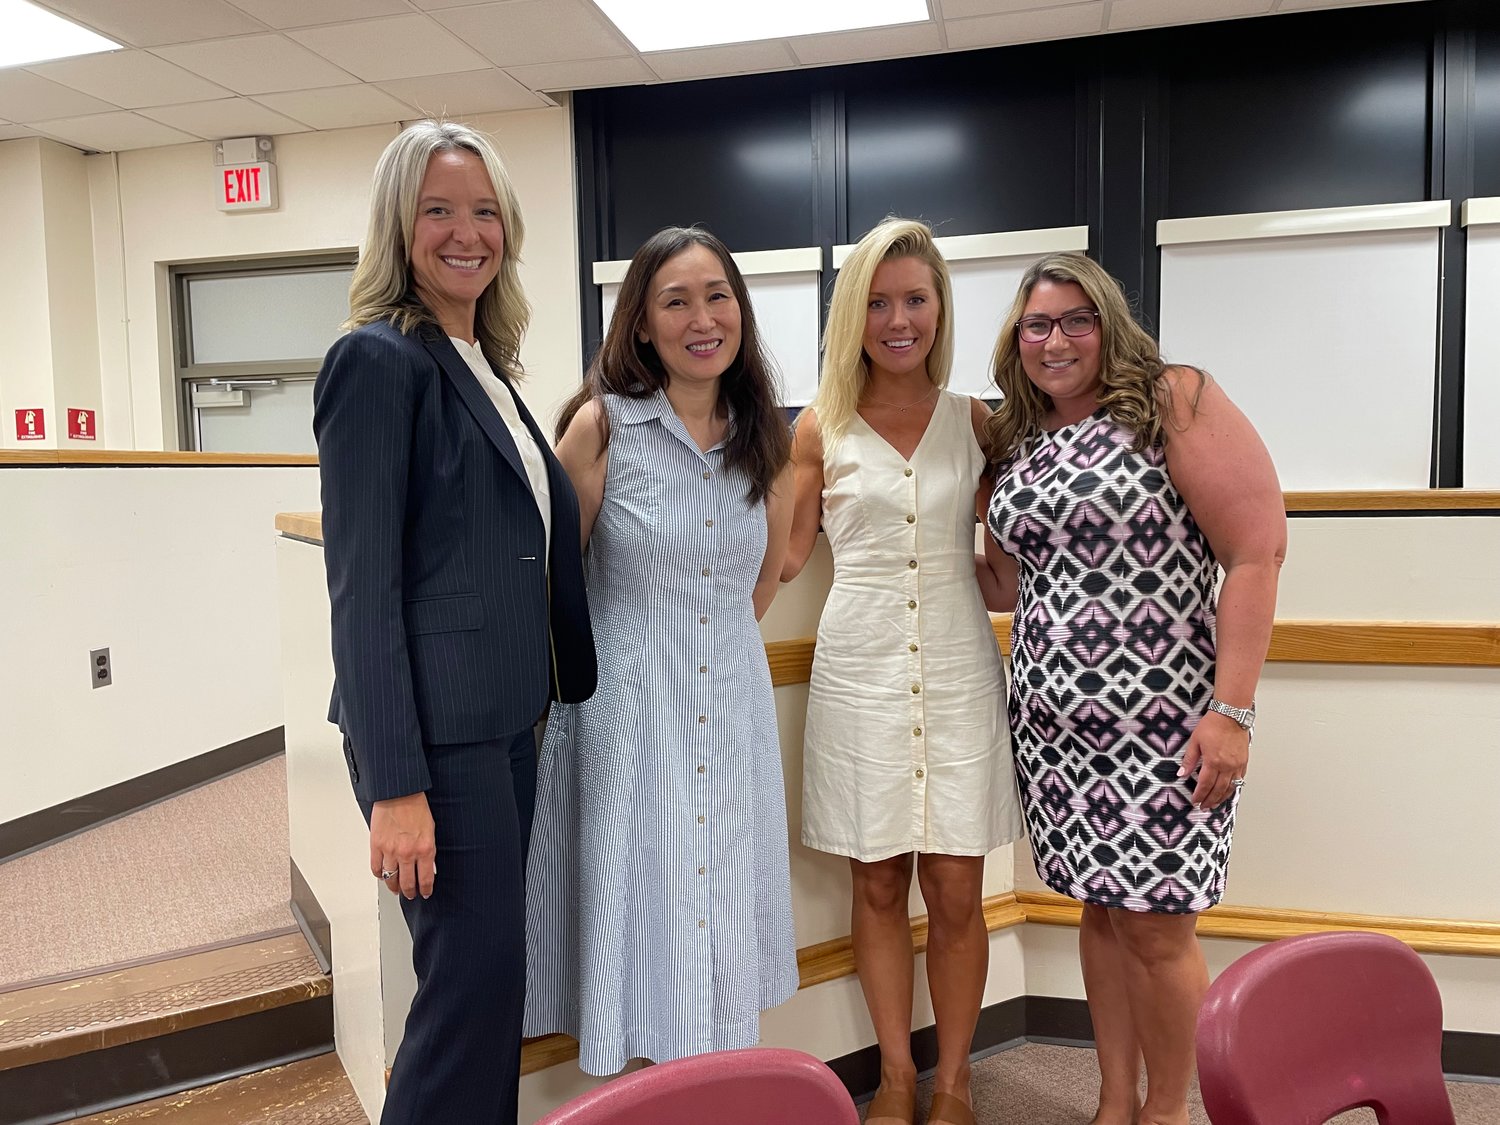 Molly Gegerson, Jennie Yi, Katherine Wilkens and Patricia Scollo will be joining the West Hempstead School District in various positions this coming year.